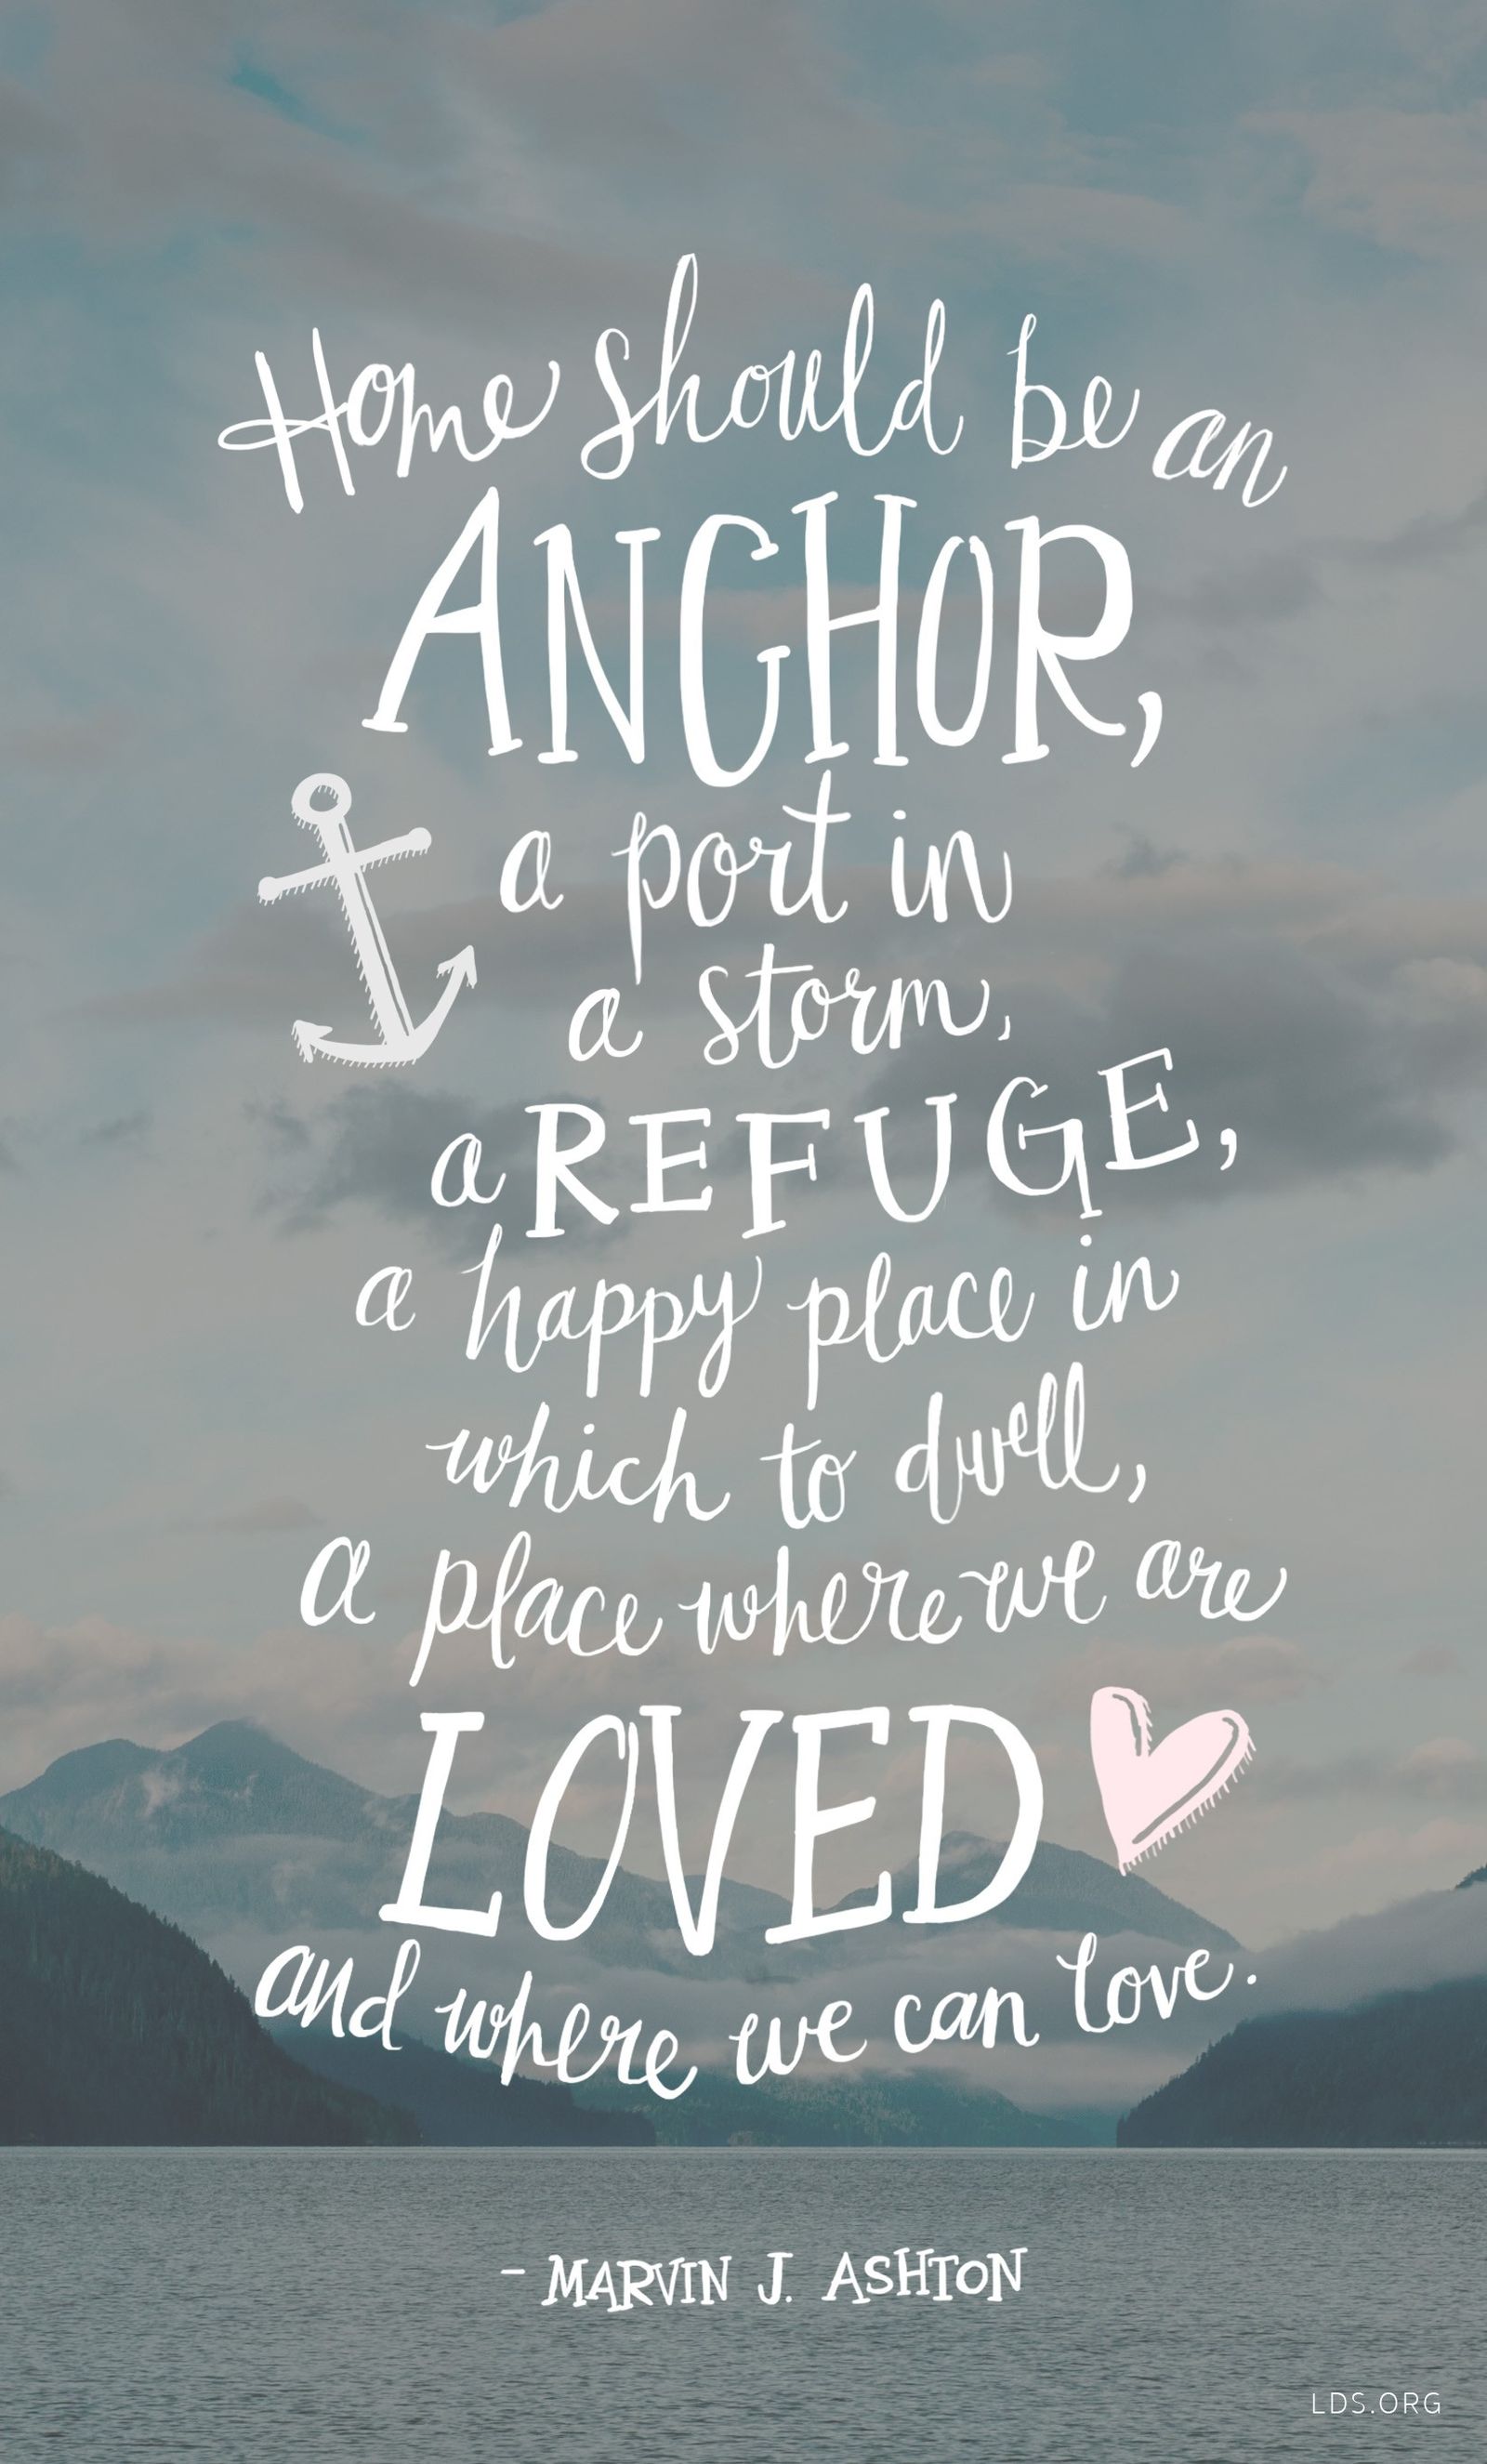 “Home should be an anchor, a port in a storm, a refuge, a happy place in which to dwell, a place where we are loved and where we can love.” —Elder Marvin J. Ashton, “A Yearning for Home” © undefined ipCode 1.